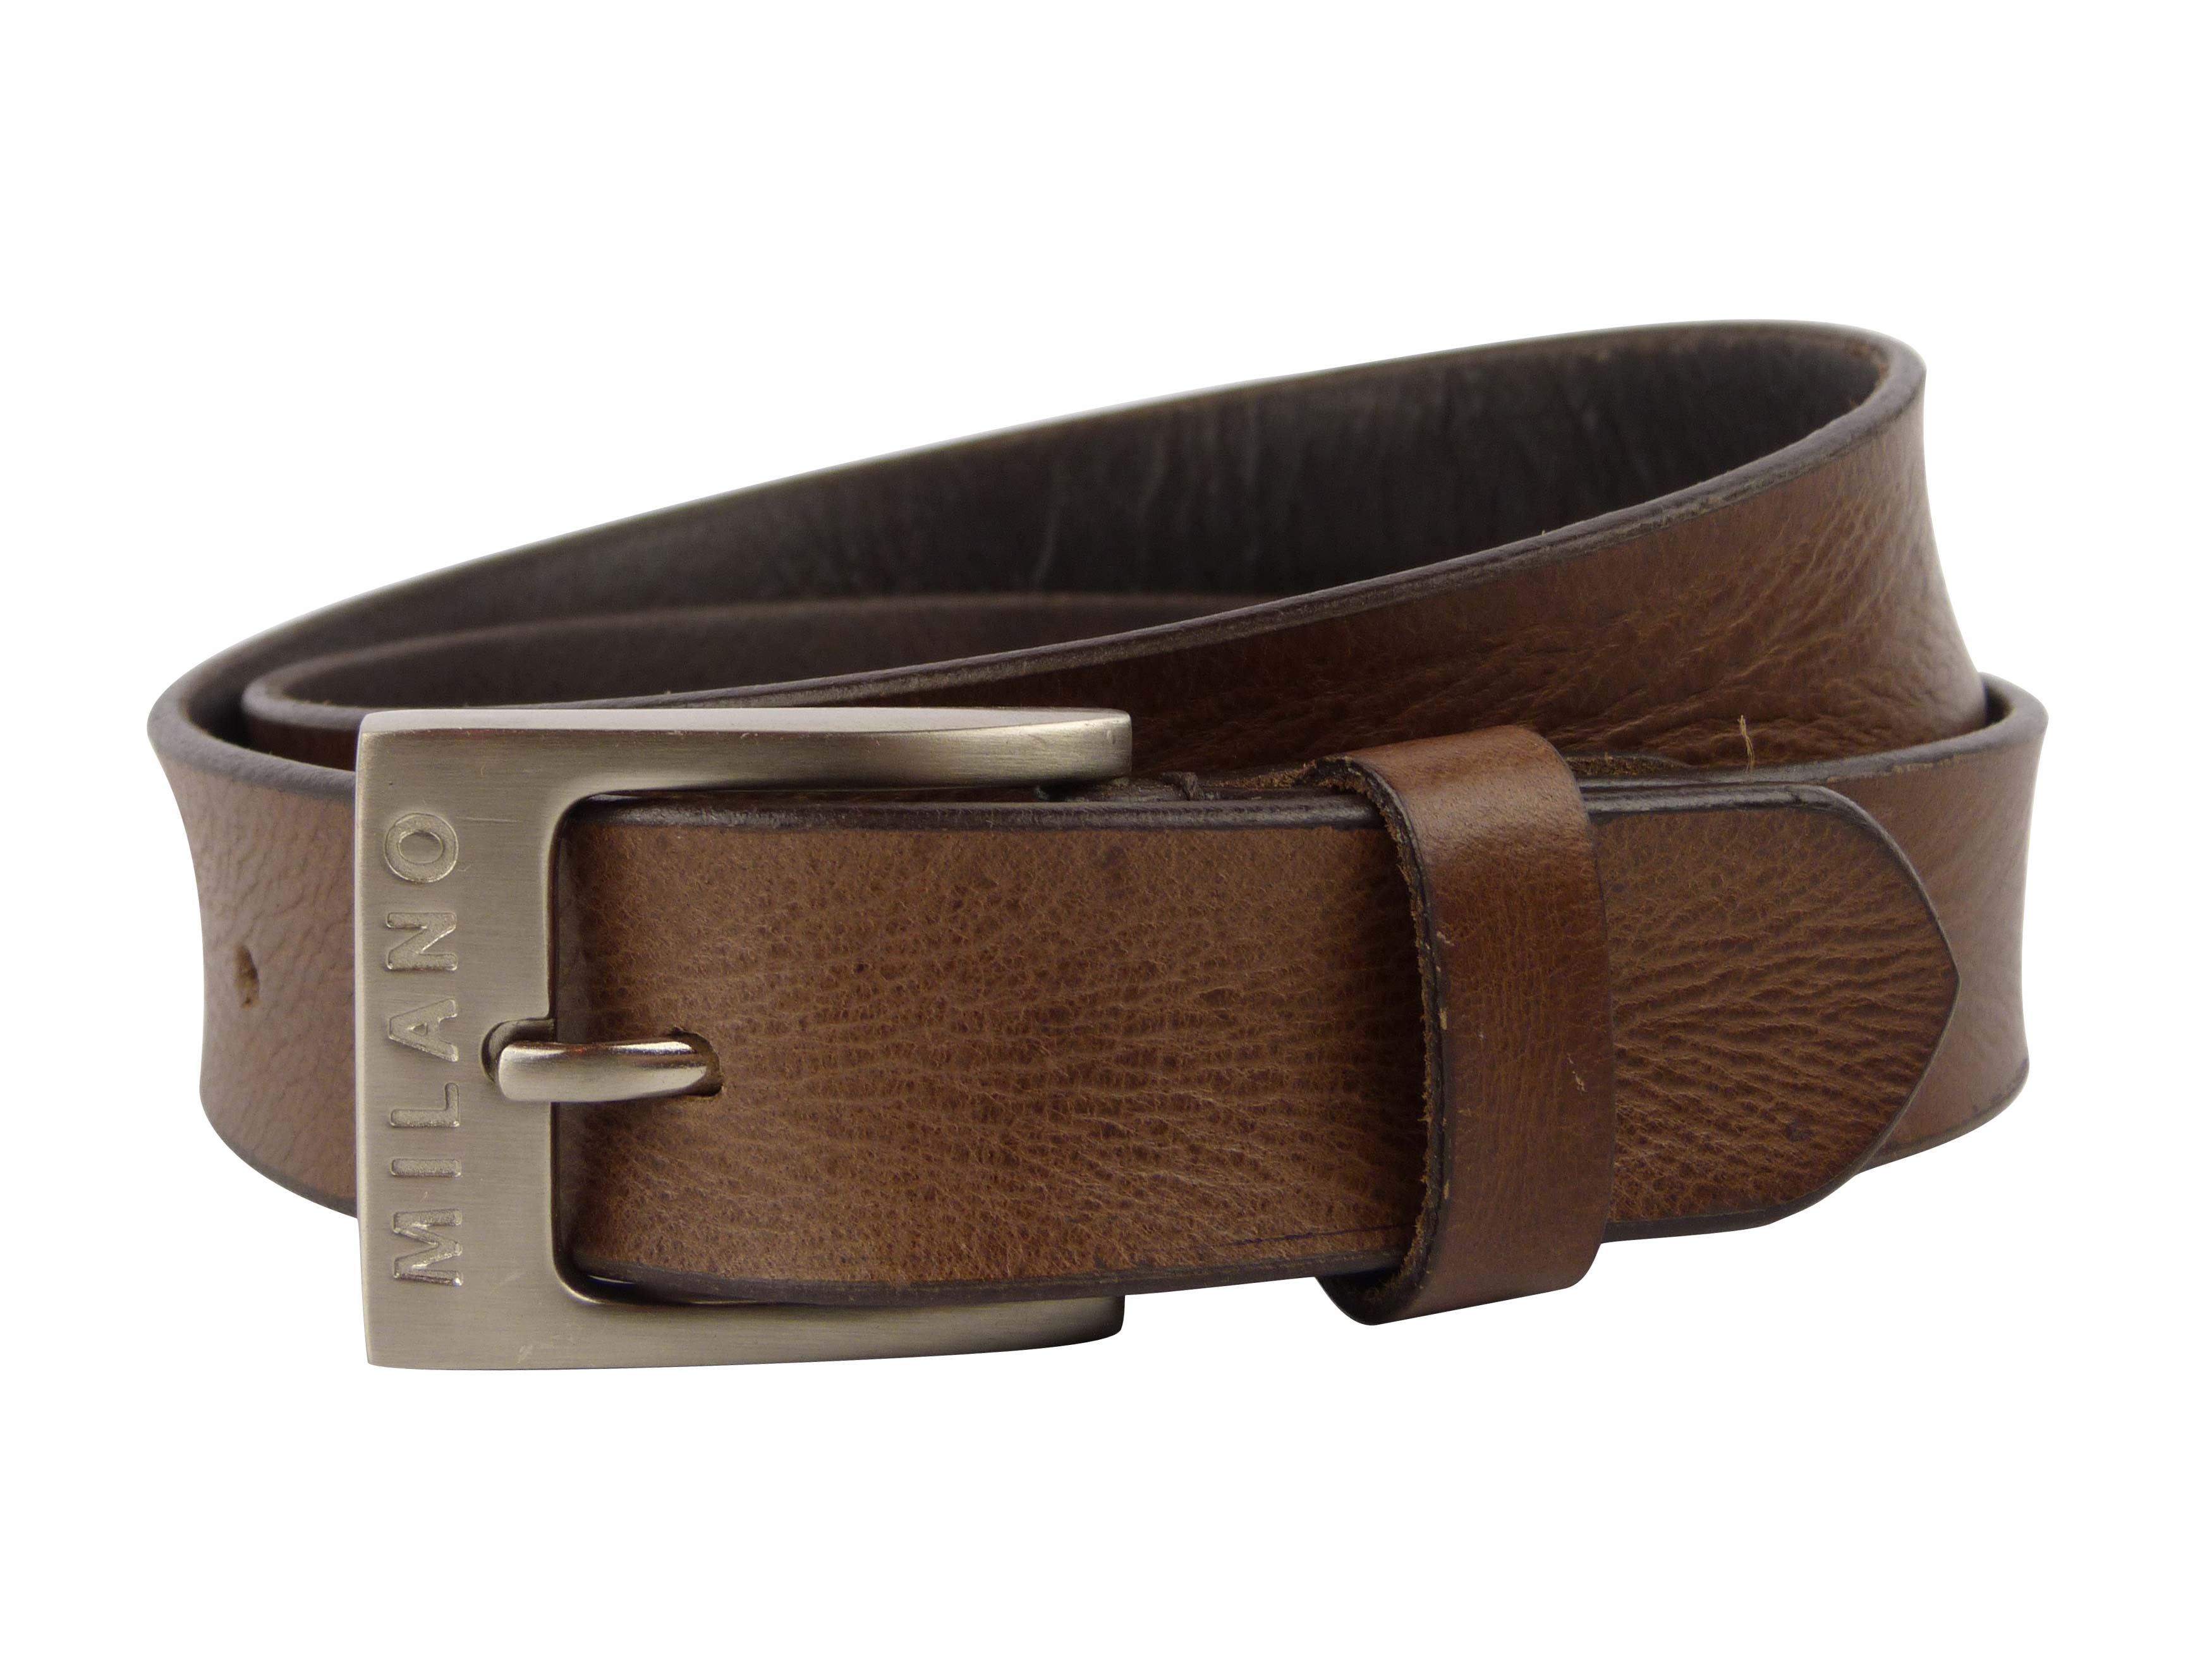 Mens Real Leather Belt 1.25" Wide All Sizes by Milano up to 48 (Brown) - Afbeelding 1 van 1